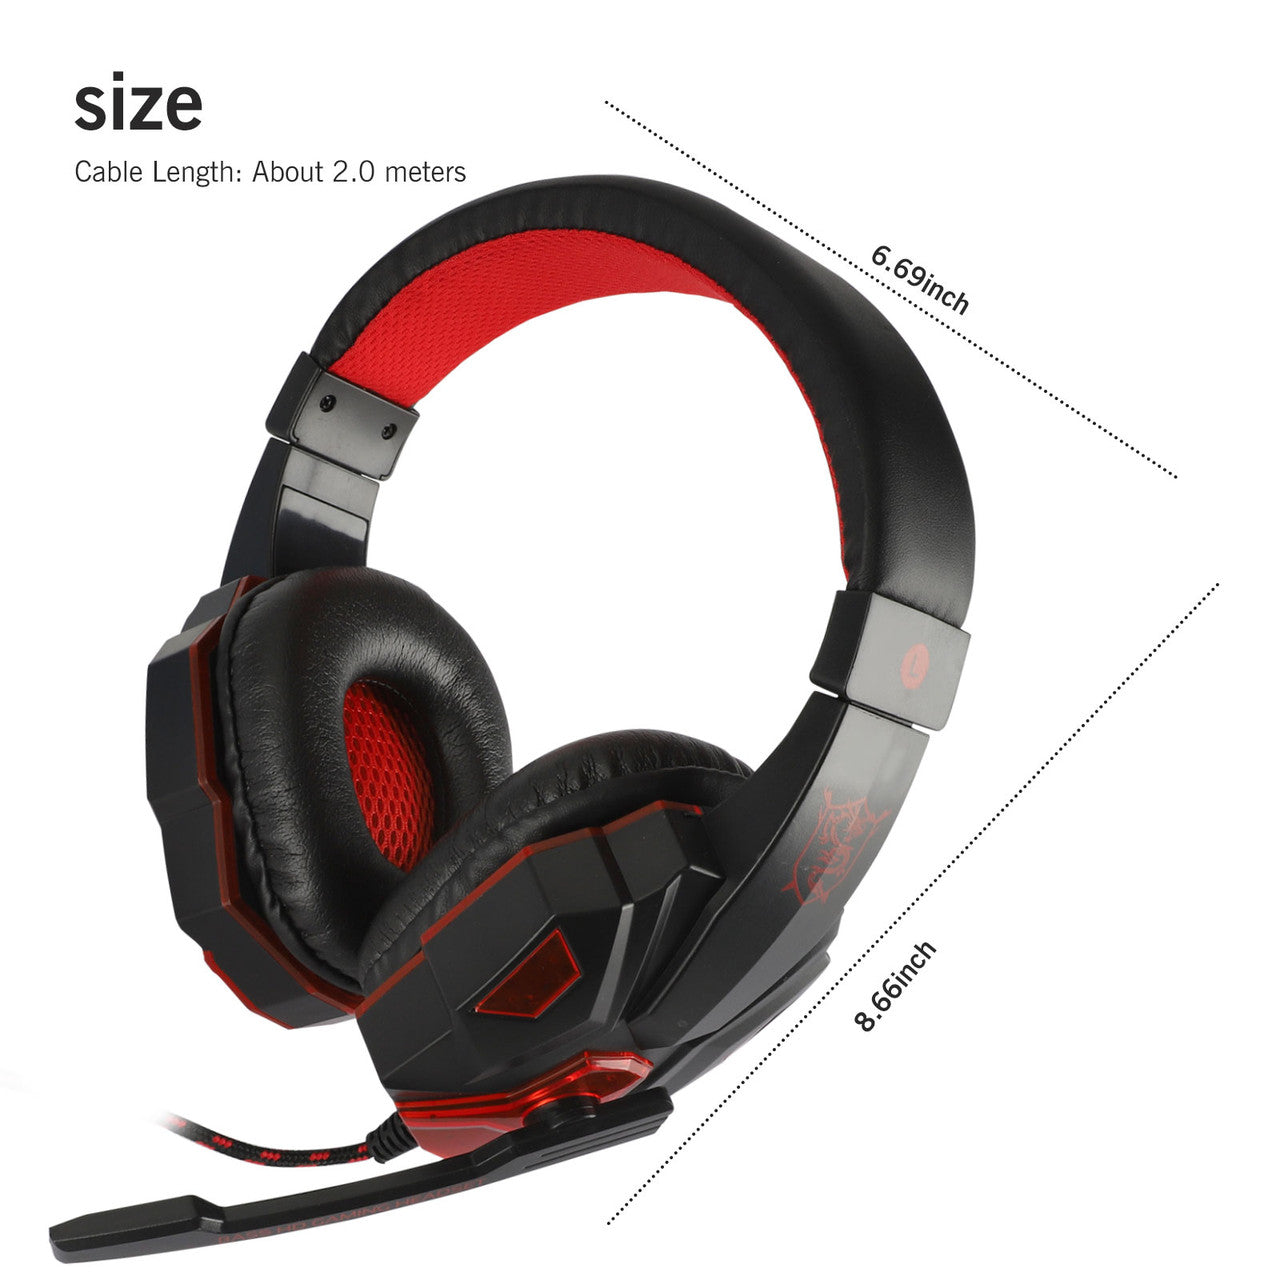 Gaming Headset with Stereo Surround Sound / Noise Canceling Mic / LED Light, for Mac PC PS3, White